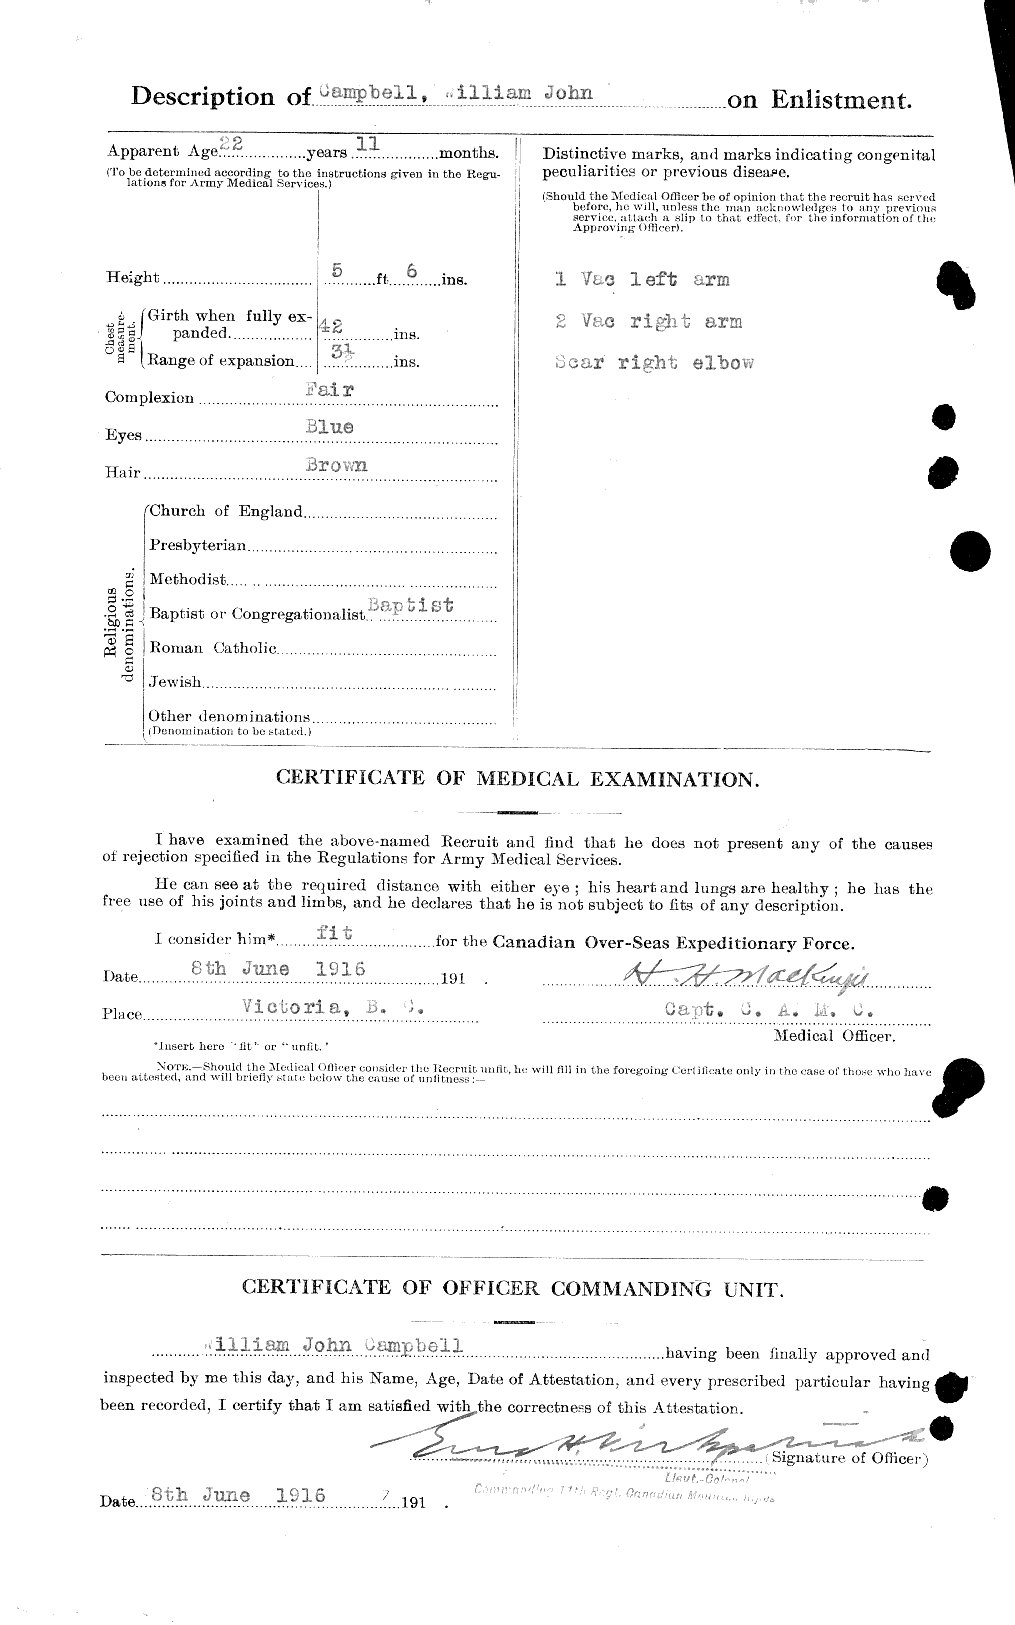 Personnel Records of the First World War - CEF 008698b